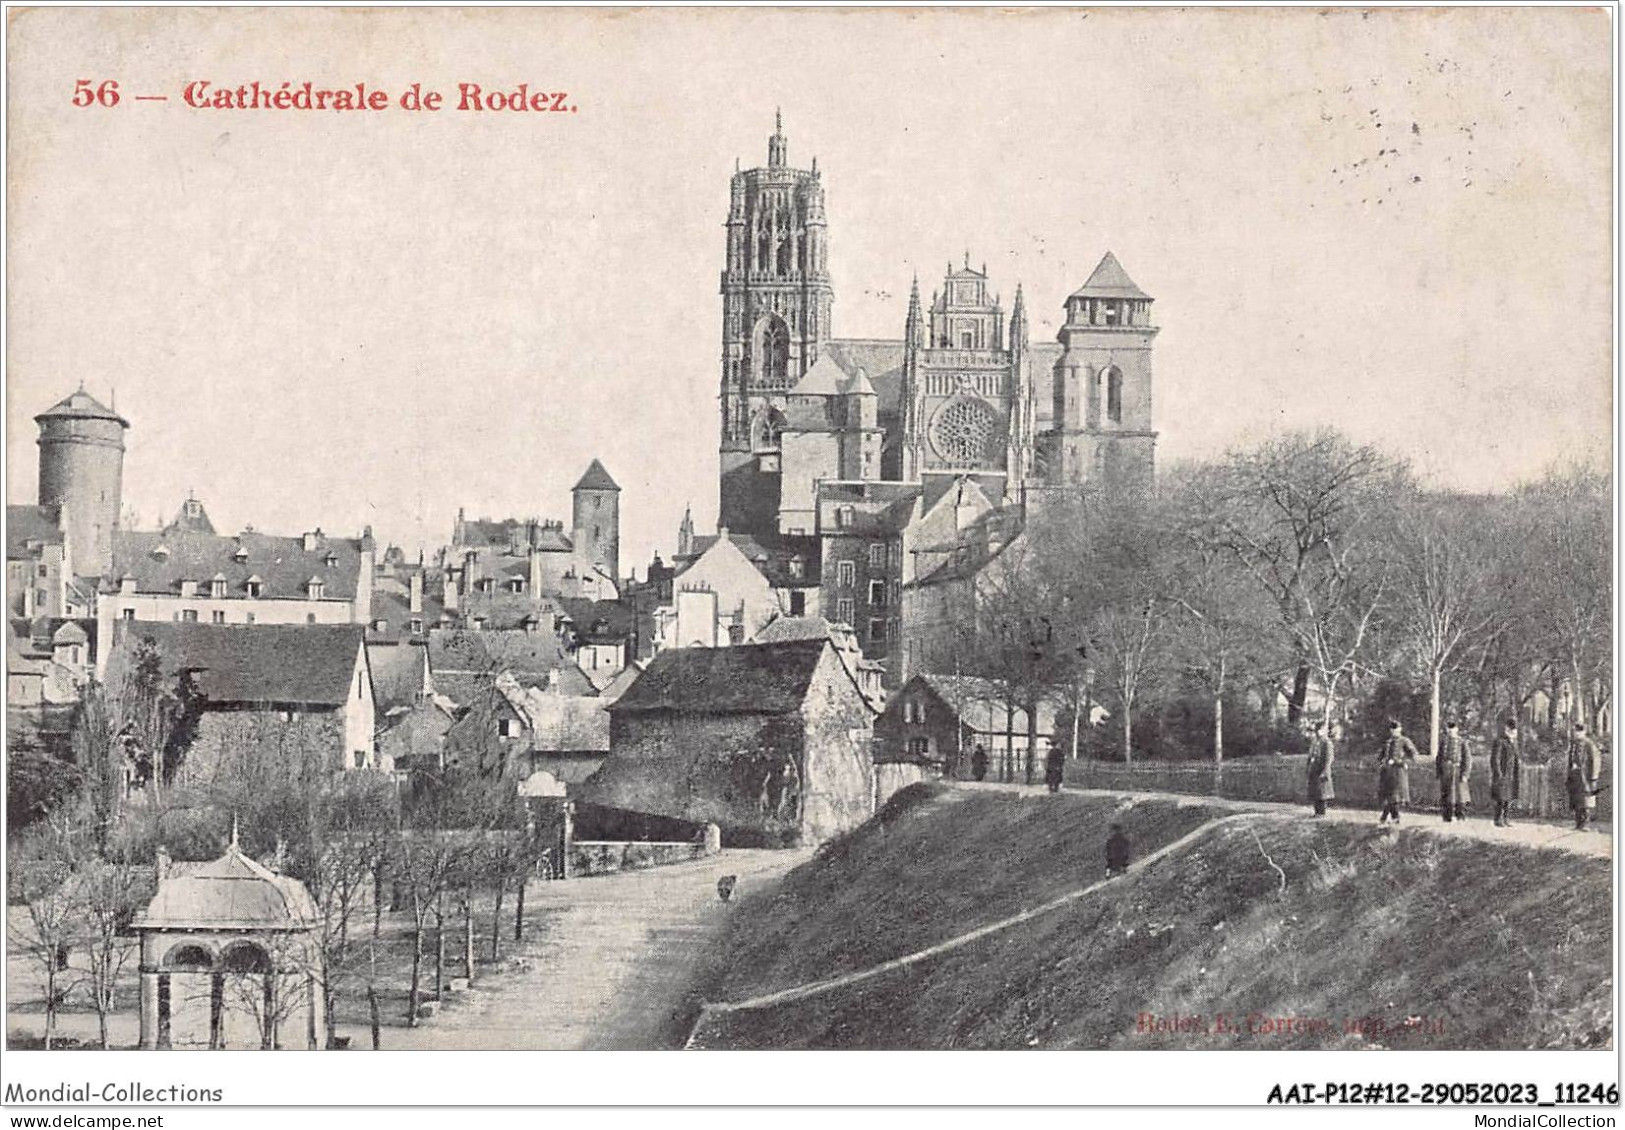 AAIP2-12-0149 - RODEZ - Cathedrale  - Rodez